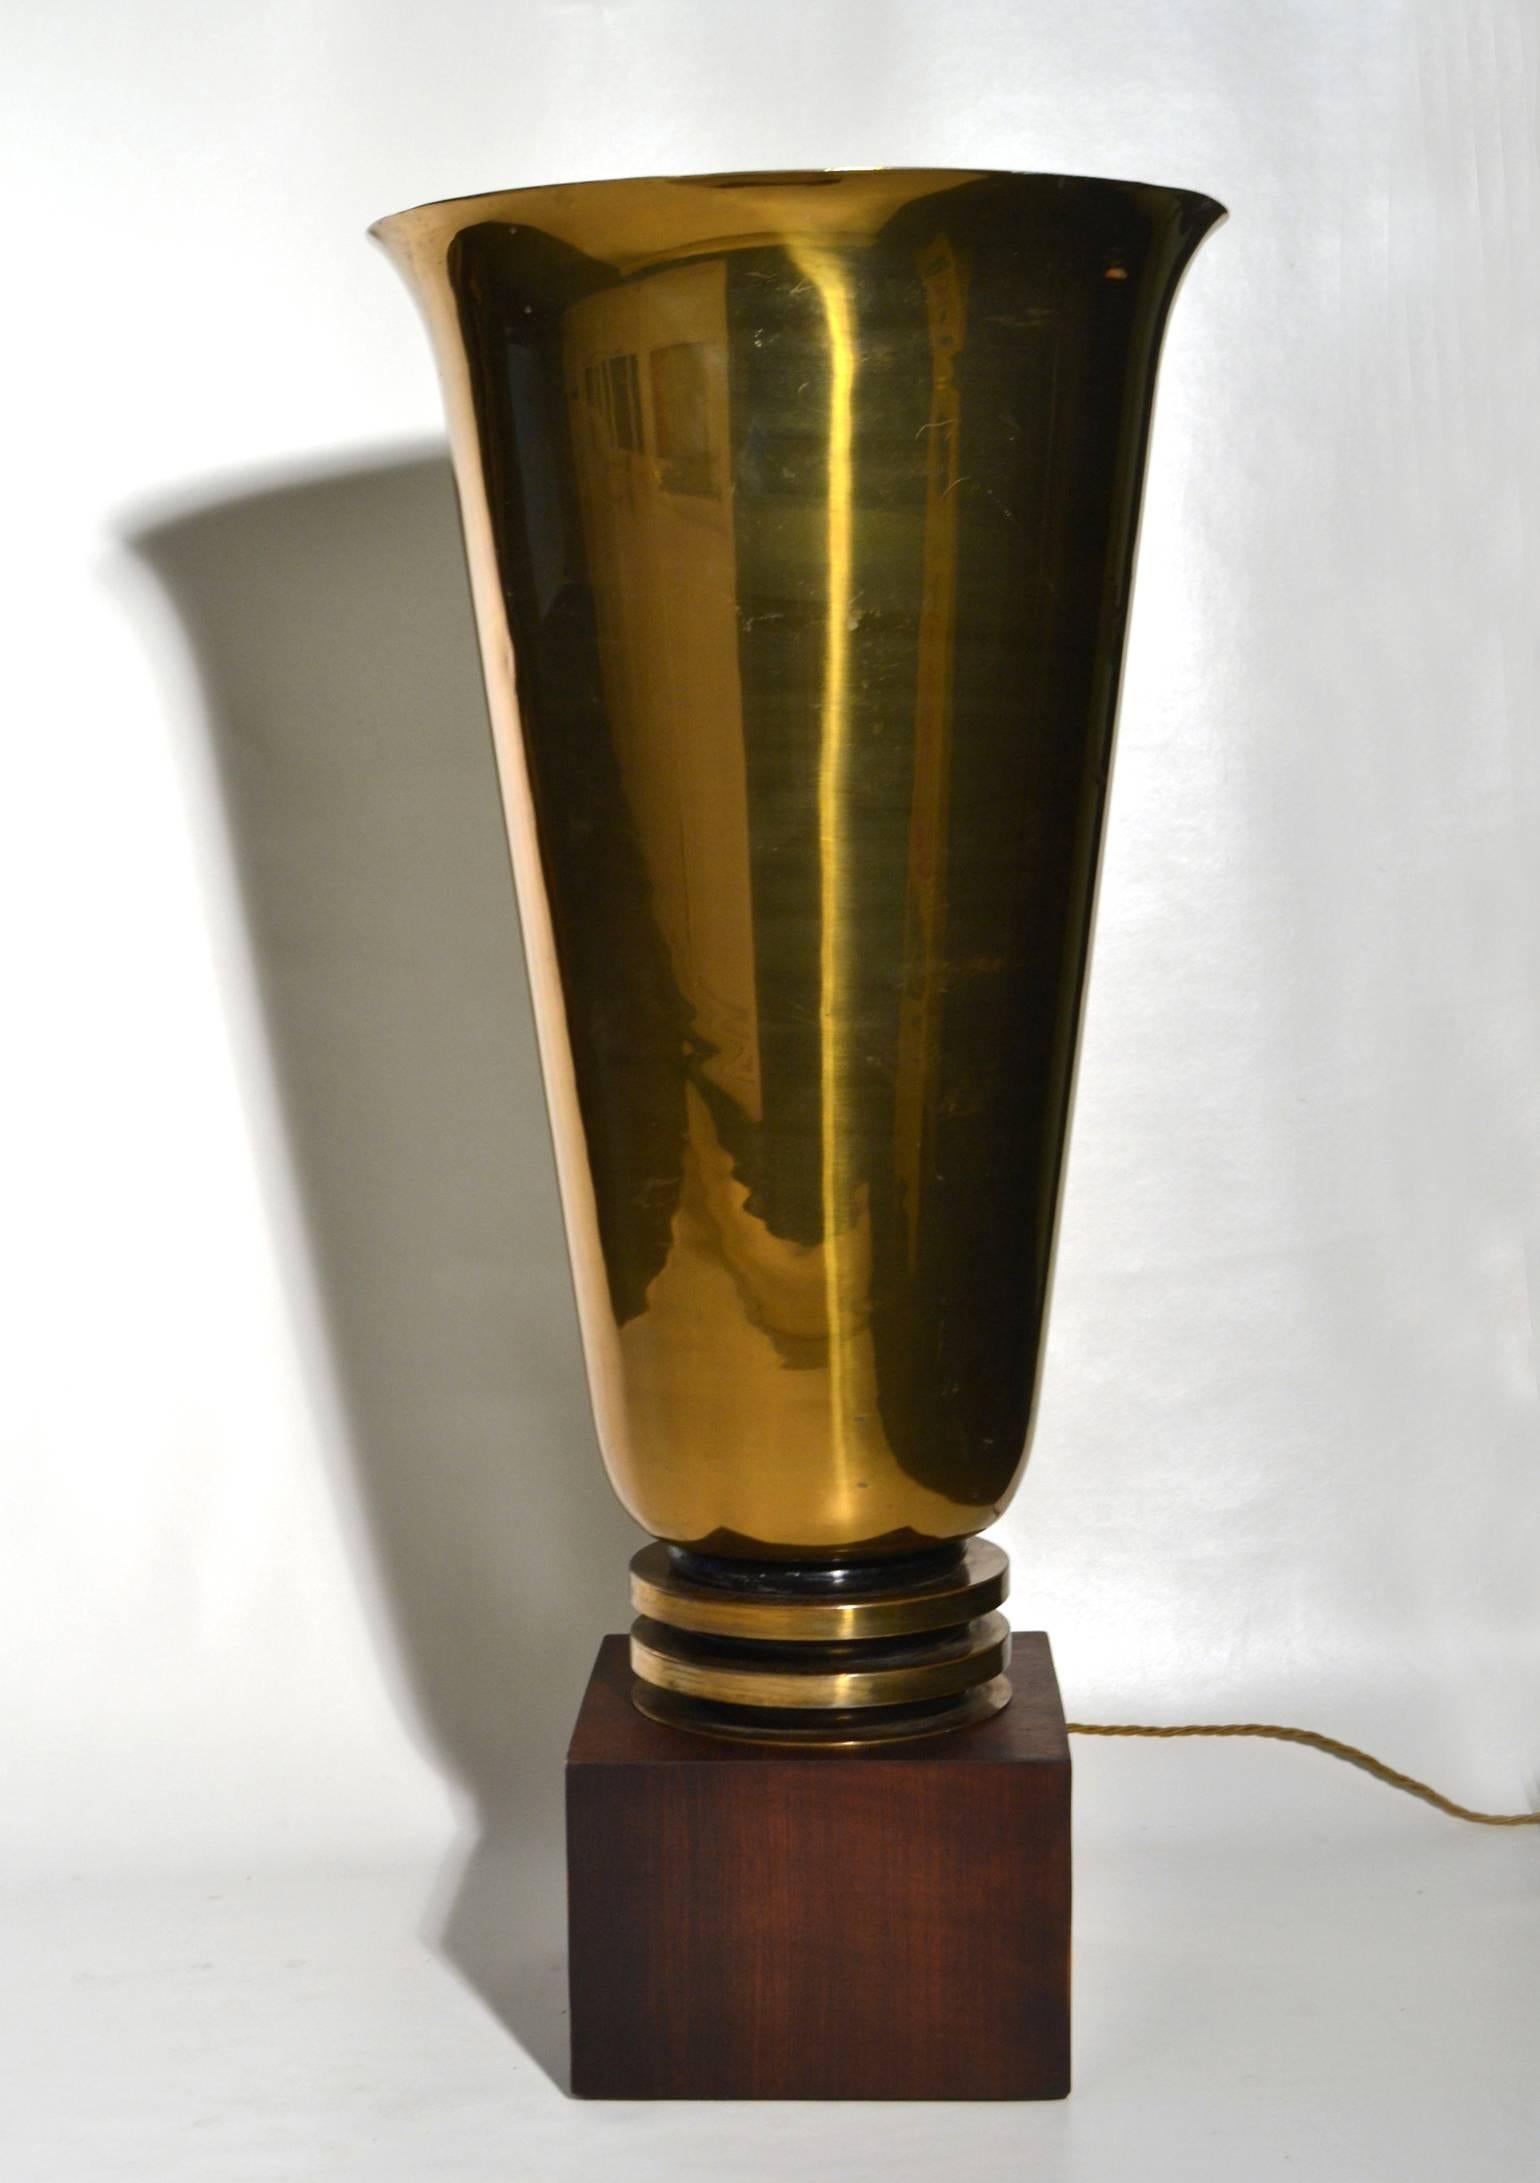 This powerful uplighter bell shaped torch lamp body is of polished brass on Magasar wooden base. The lamp would originally been placed as a centrepiece in a hallway, a stairway or on a table.
 French tabletop torchiere gleams as the polished brass